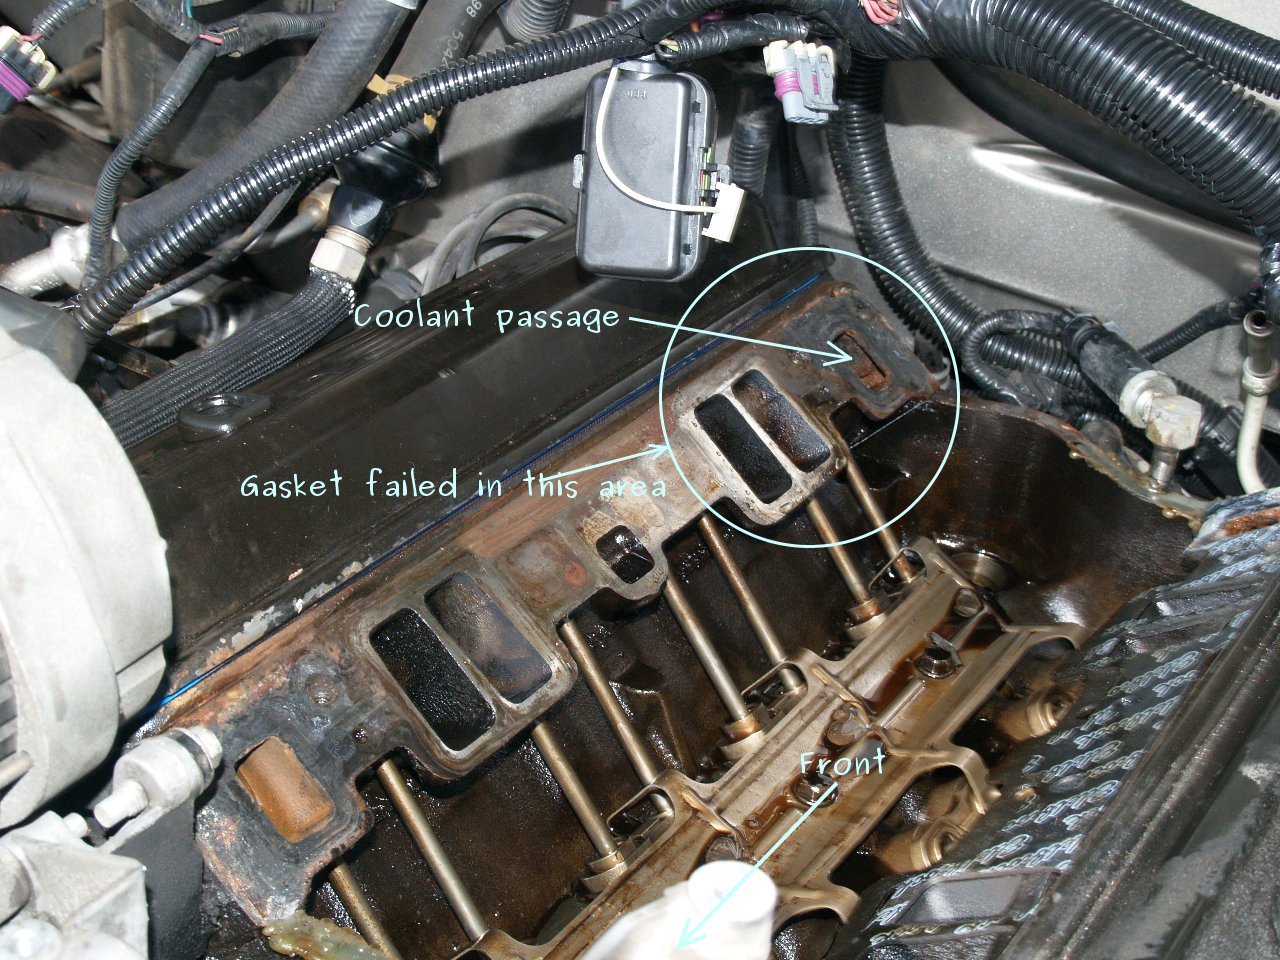 See P02B0 in engine